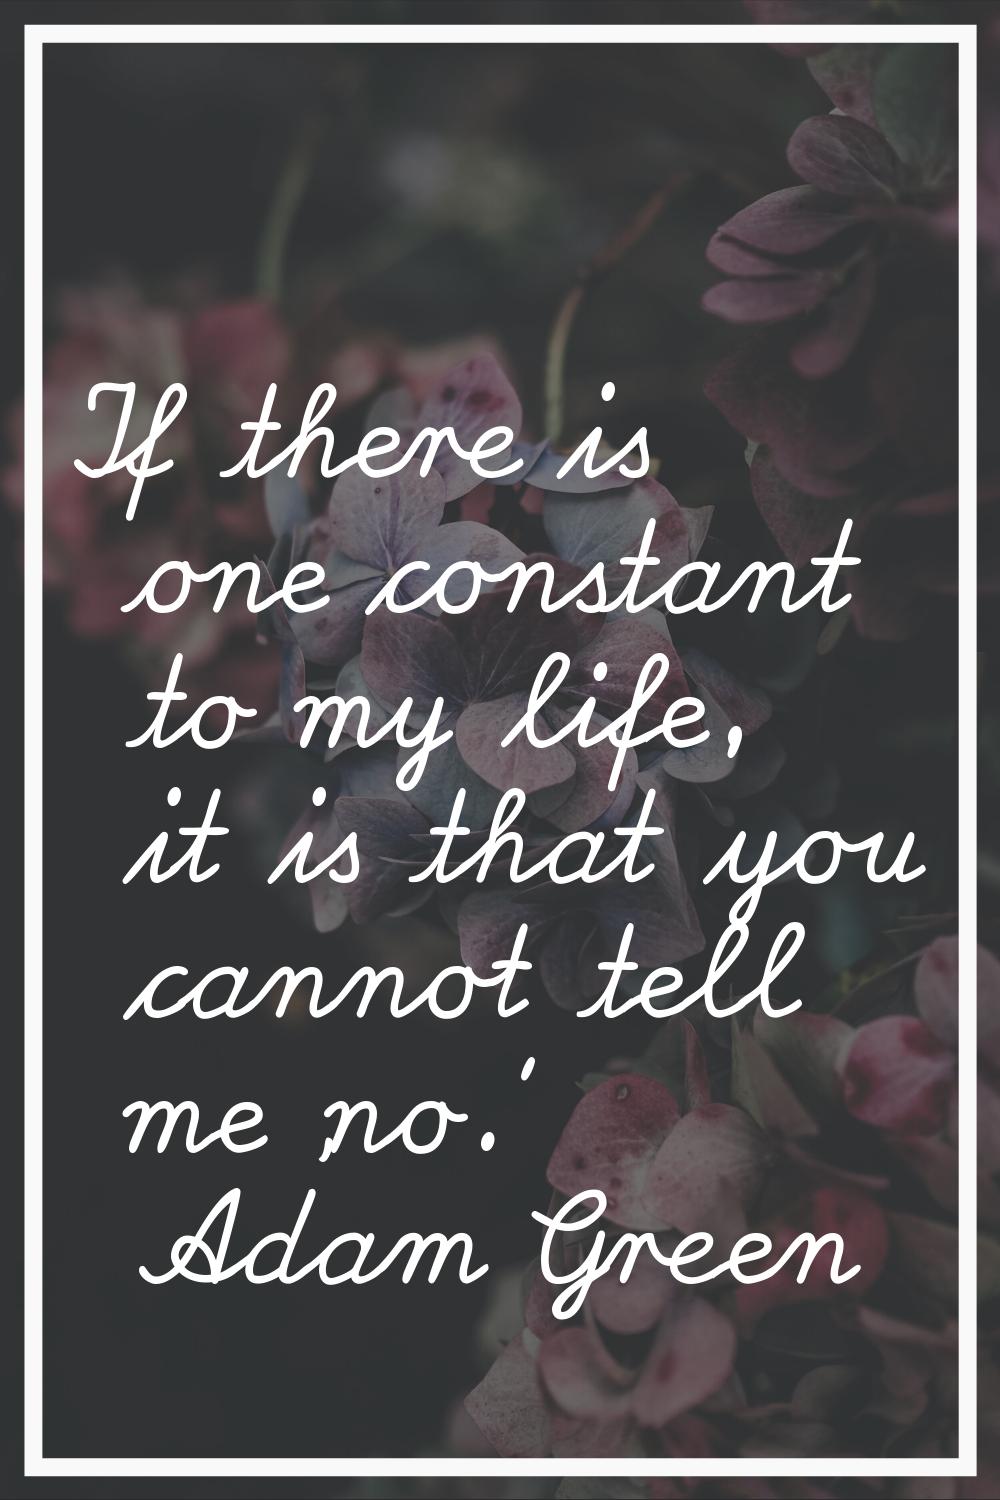 If there is one constant to my life, it is that you cannot tell me 'no.'